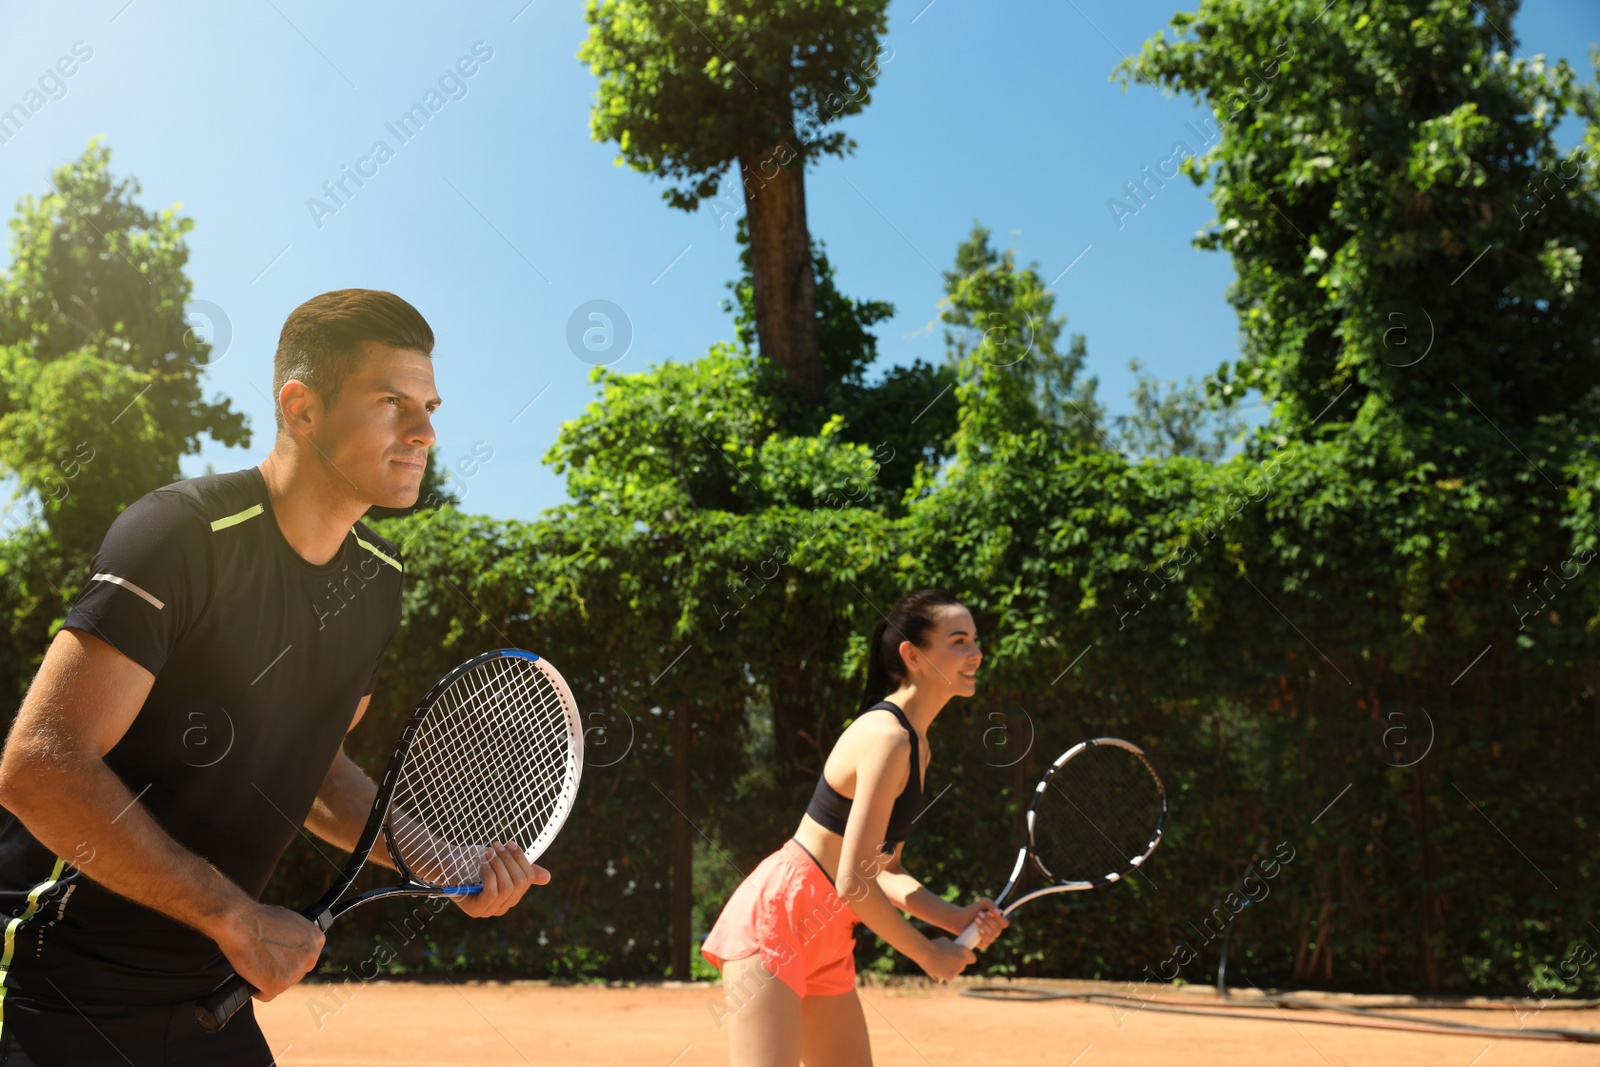 Photo of Couple playing tennis on court during sunny day